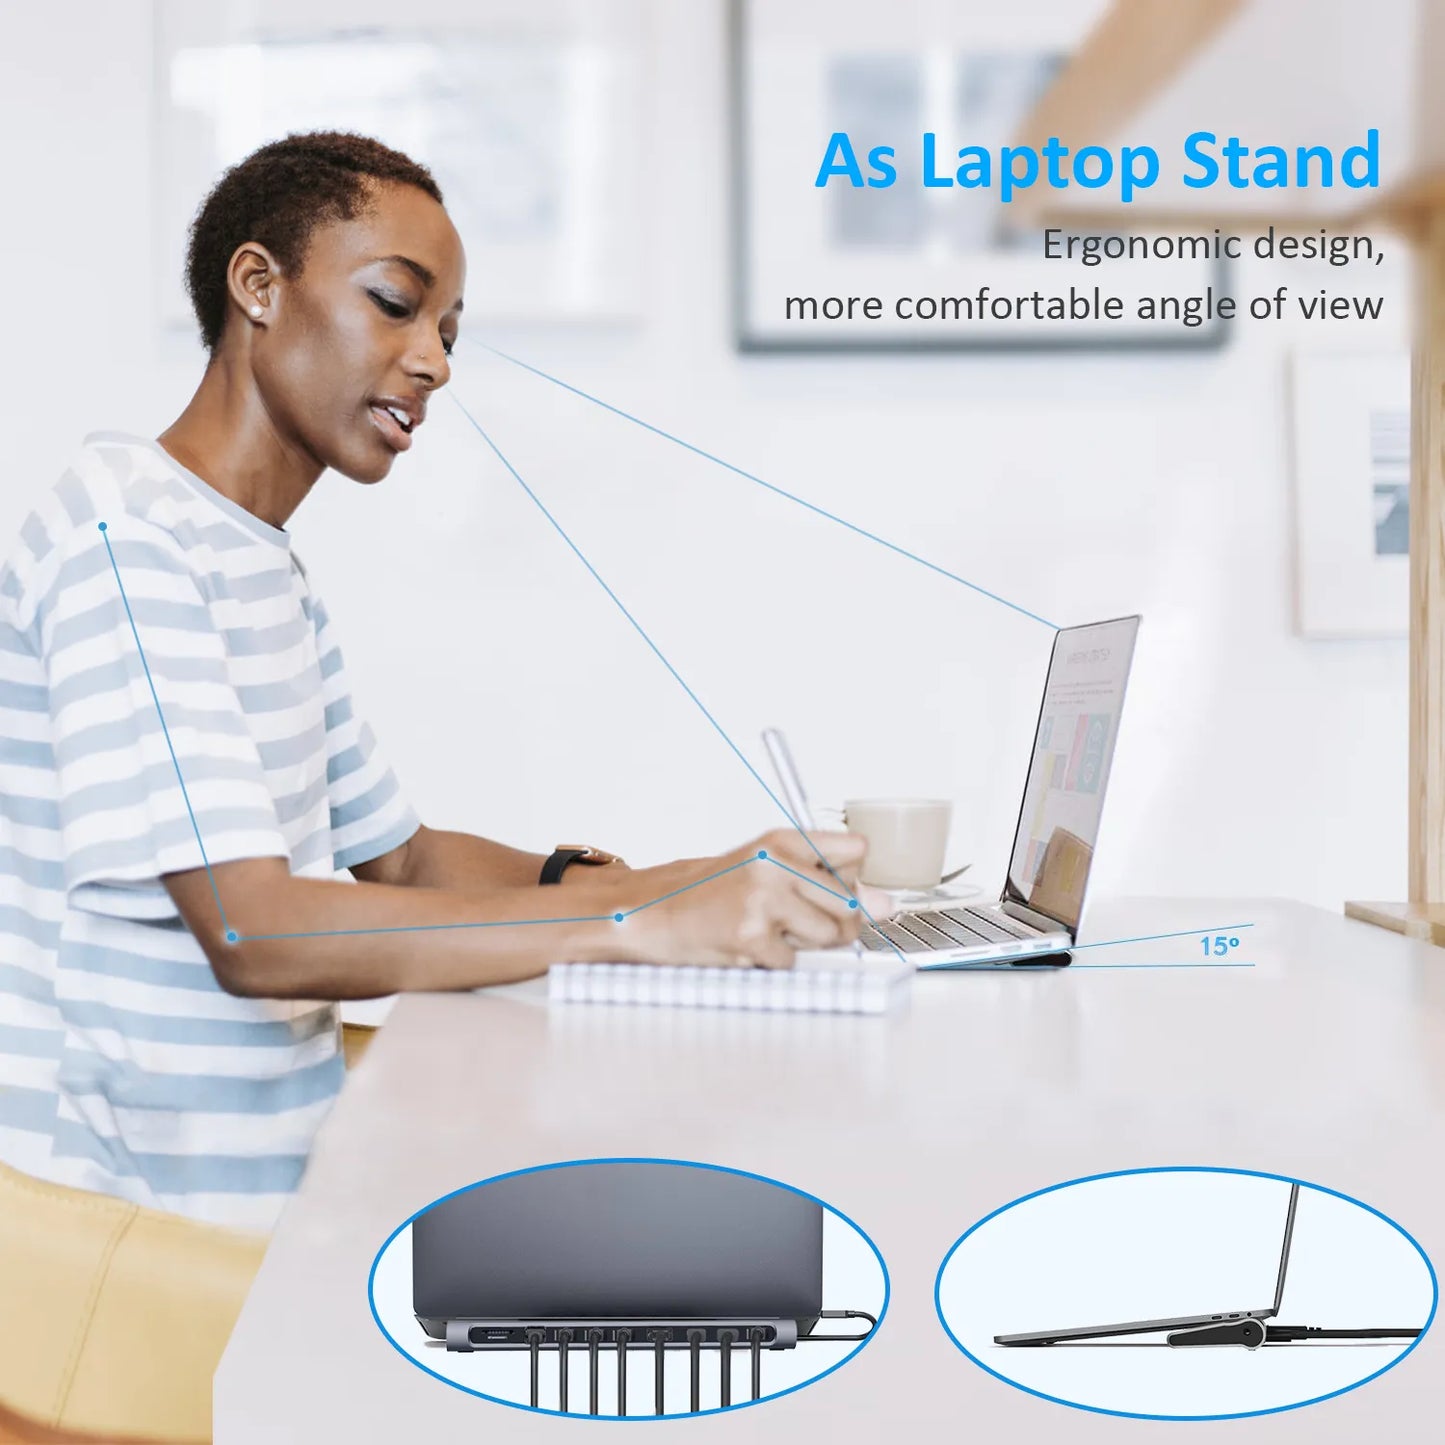 USB C docking station as laptop stand